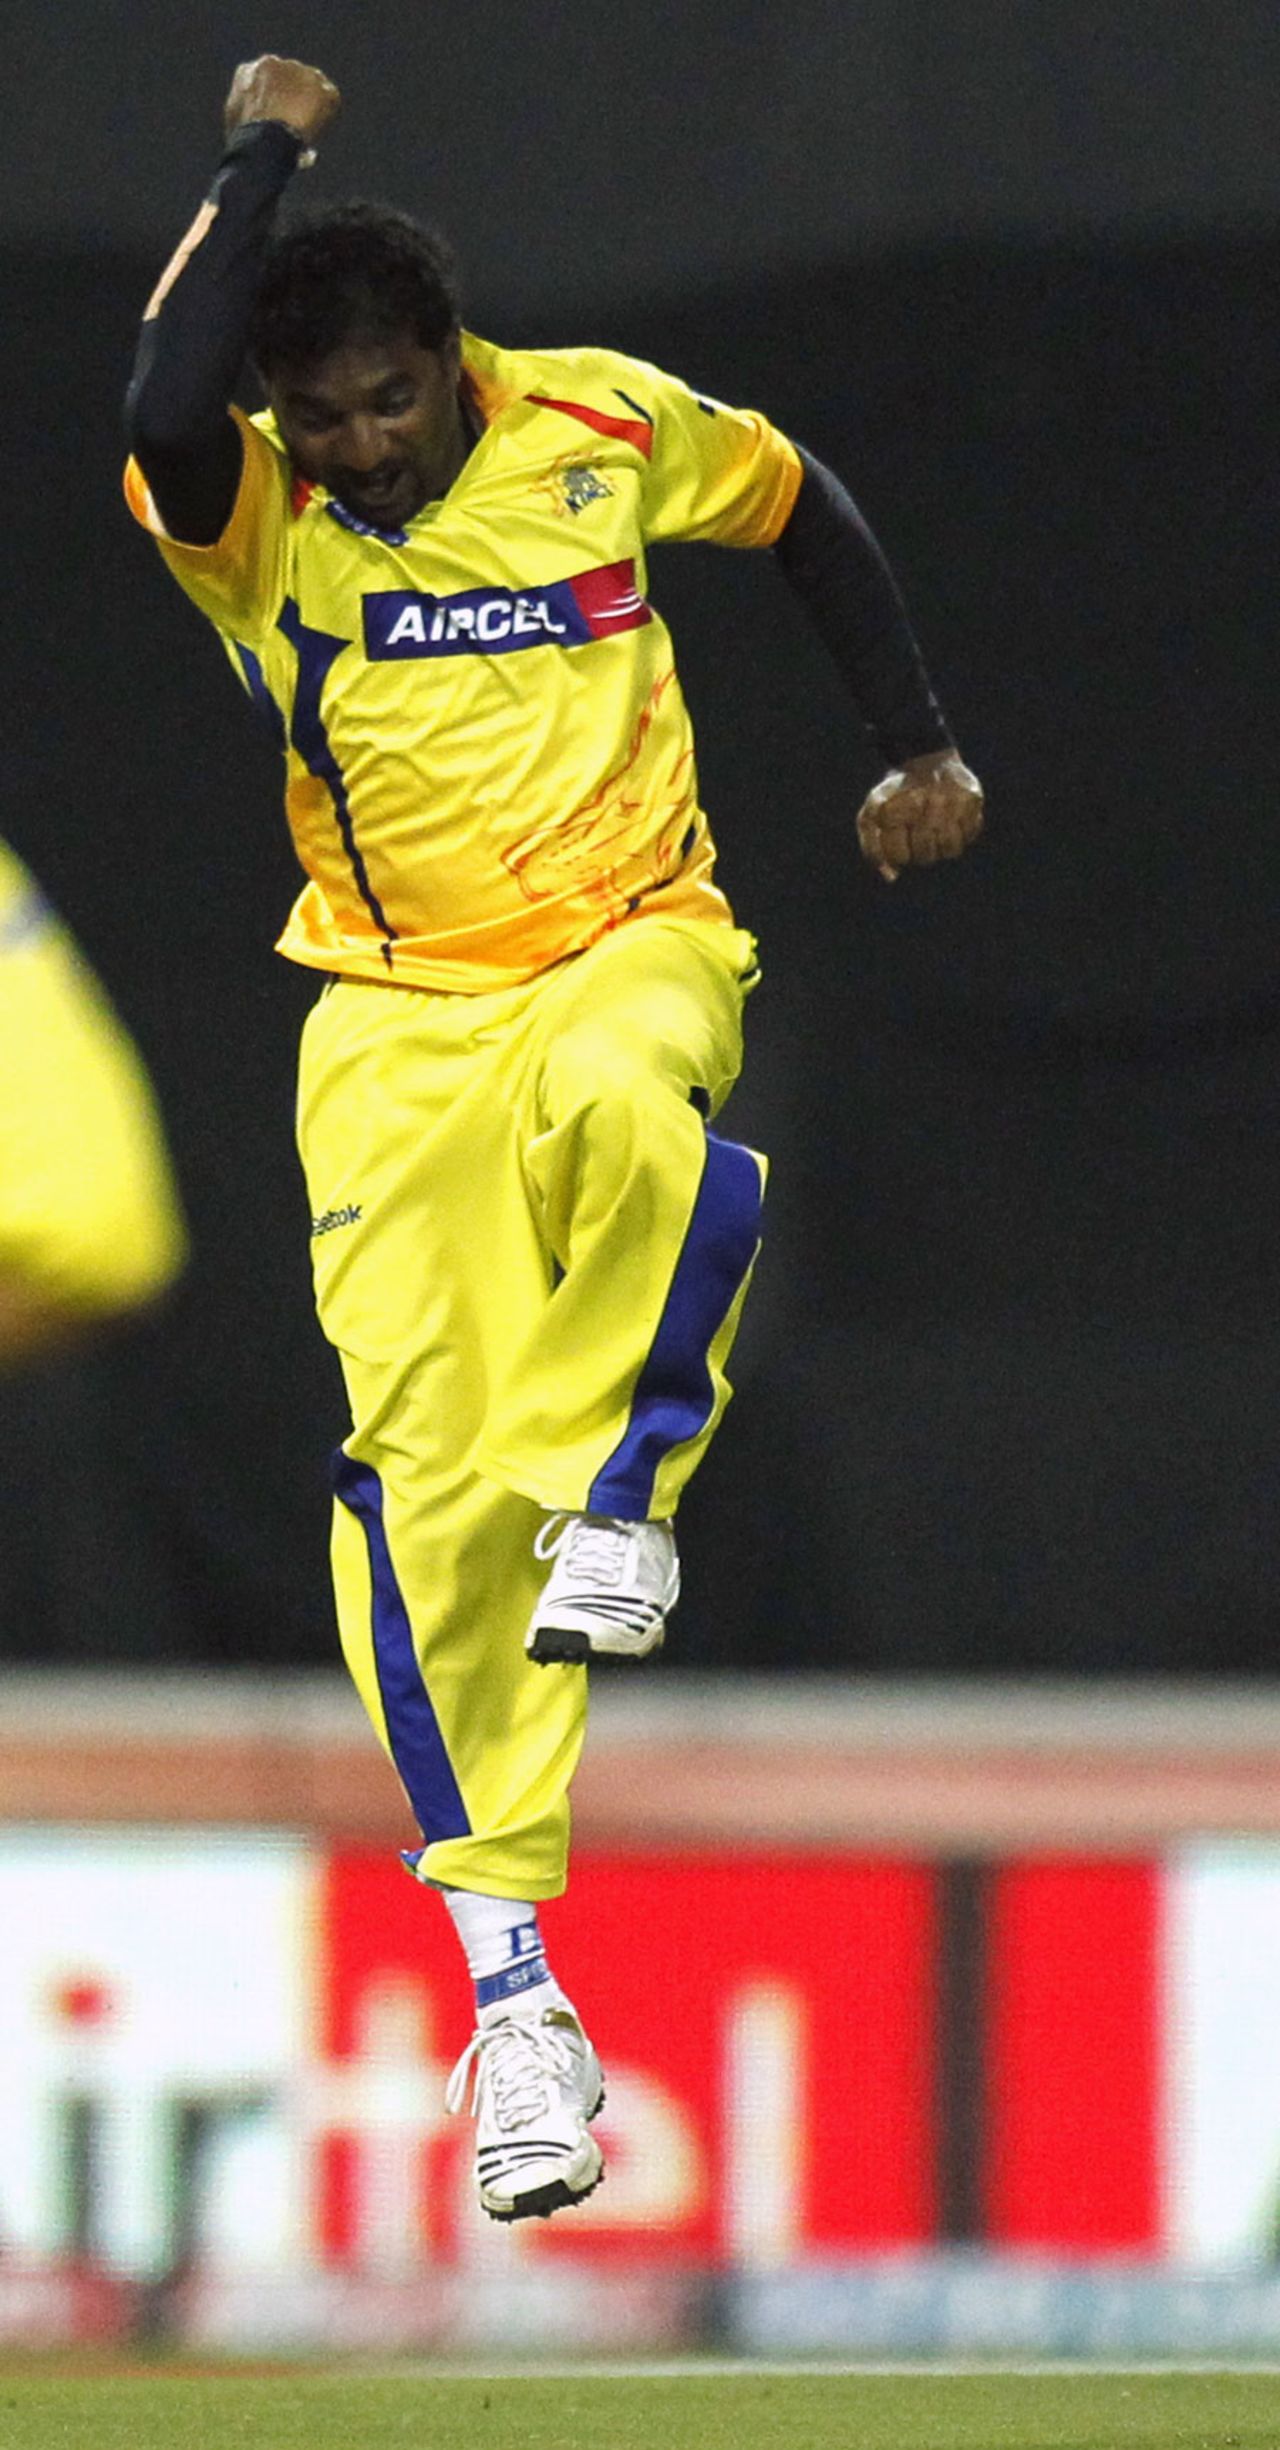 Muttiah Muralitharan is delighted after snaring a wicket, Warriors v Chennai, Champions League Twenty20, Johannesburg, September 26, 2010